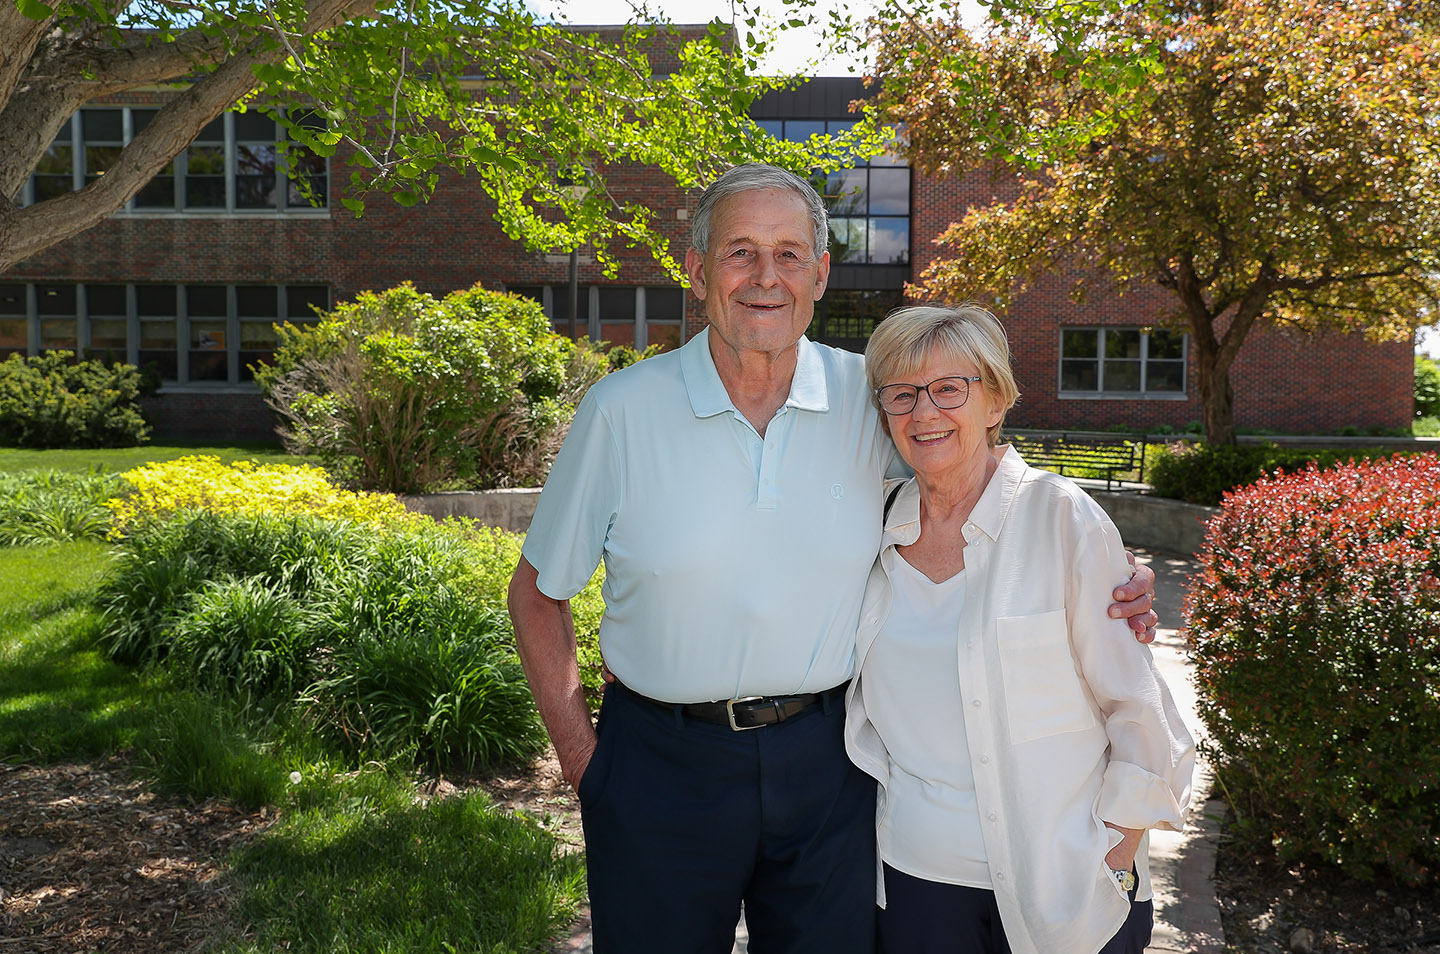 Tom and Sonja Kropp both retired from UNK at the end of the spring semester. He was an assistant professor in the Department of Kinesiology and Sport Sciences and she was an associate professor in the Department of Modern Languages.